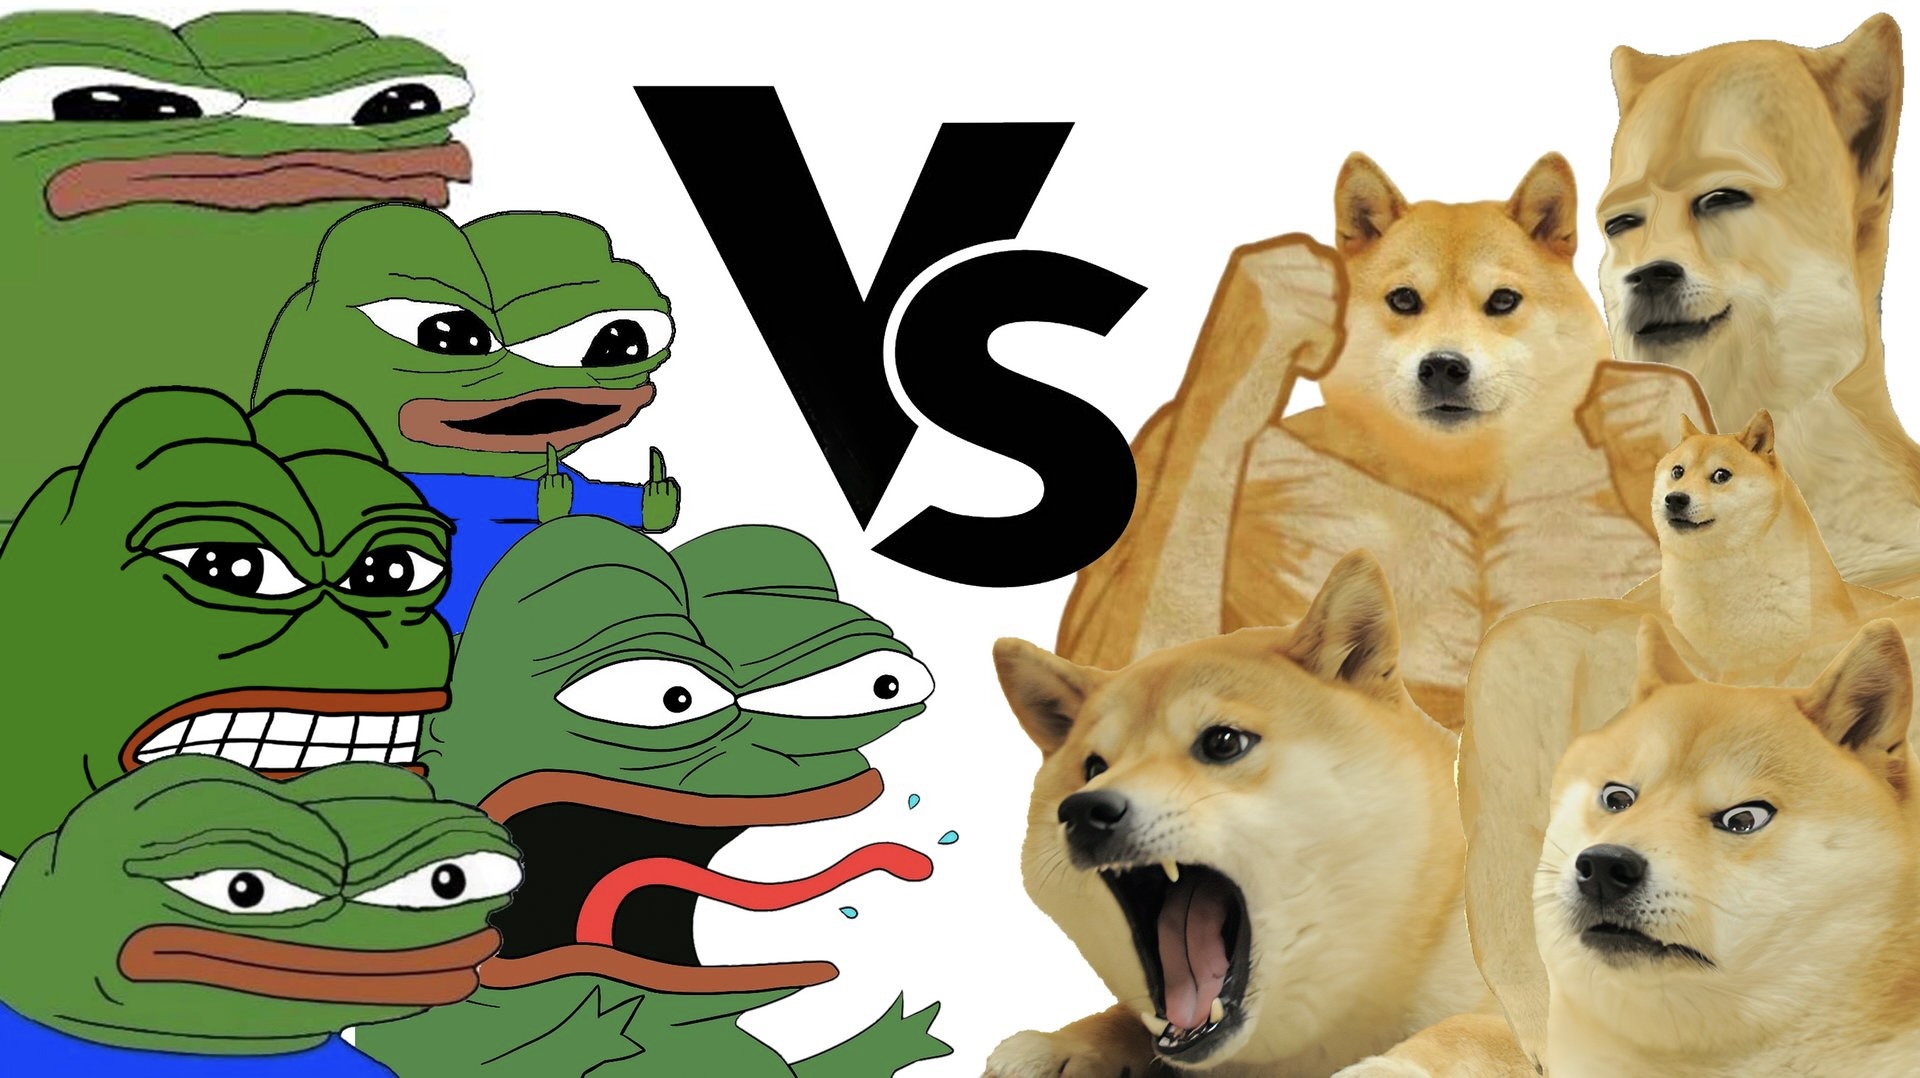 Pepe Coin vs. Dogecoin: If You Had $1000, Which Crypto Should You Buy?